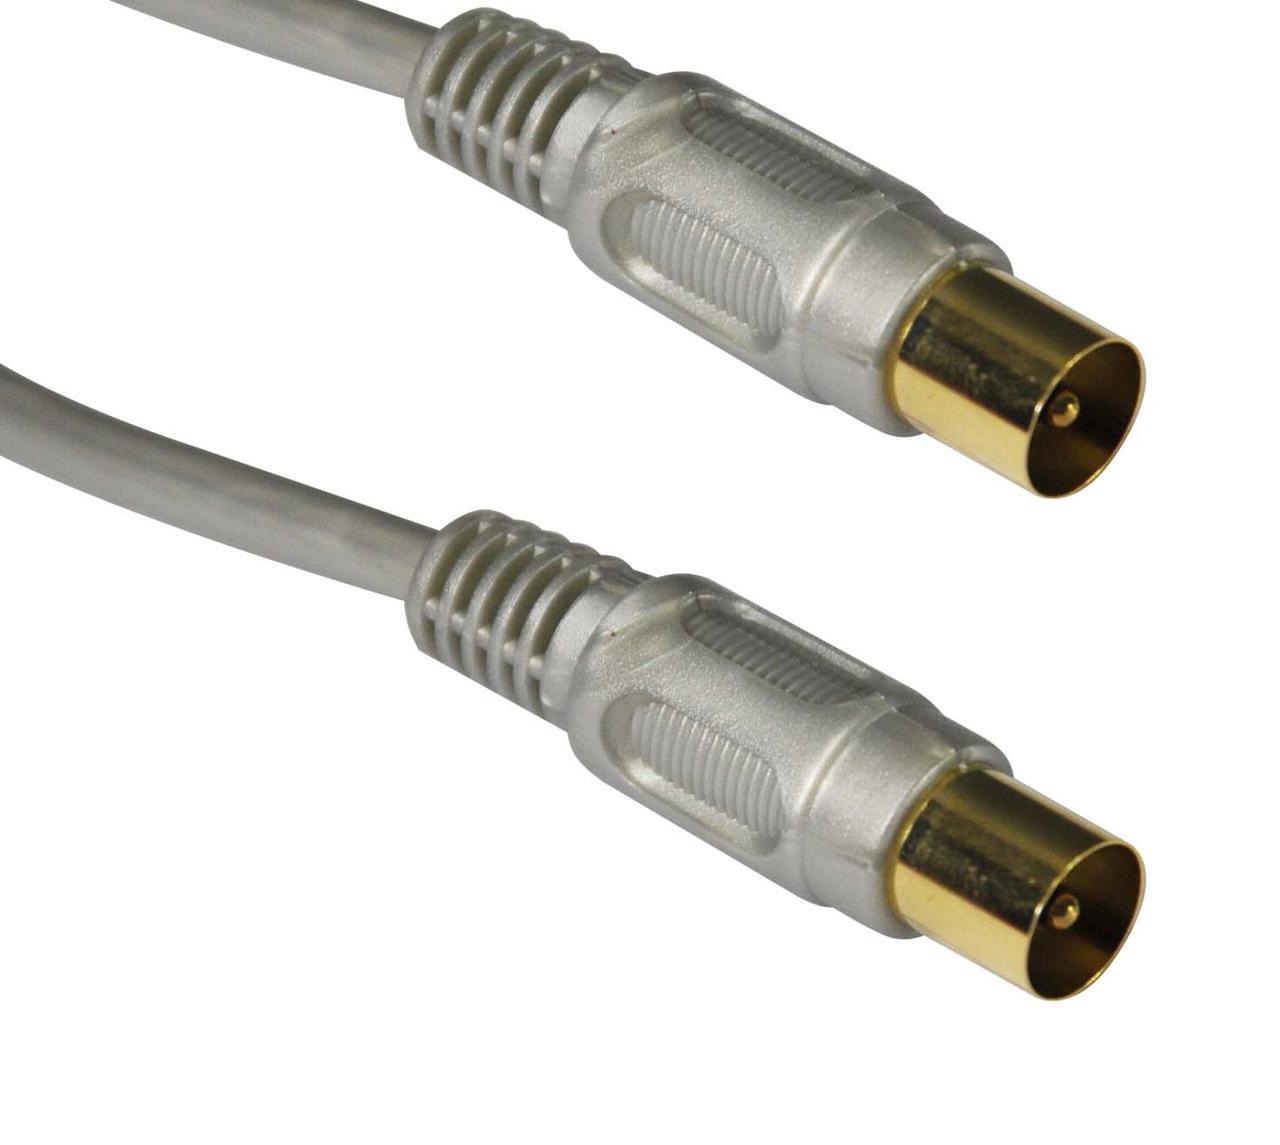 MAXVIEW H87100 DIGITAL COAXIAL TO COAXIAL FLYLEAD GOLD 10M